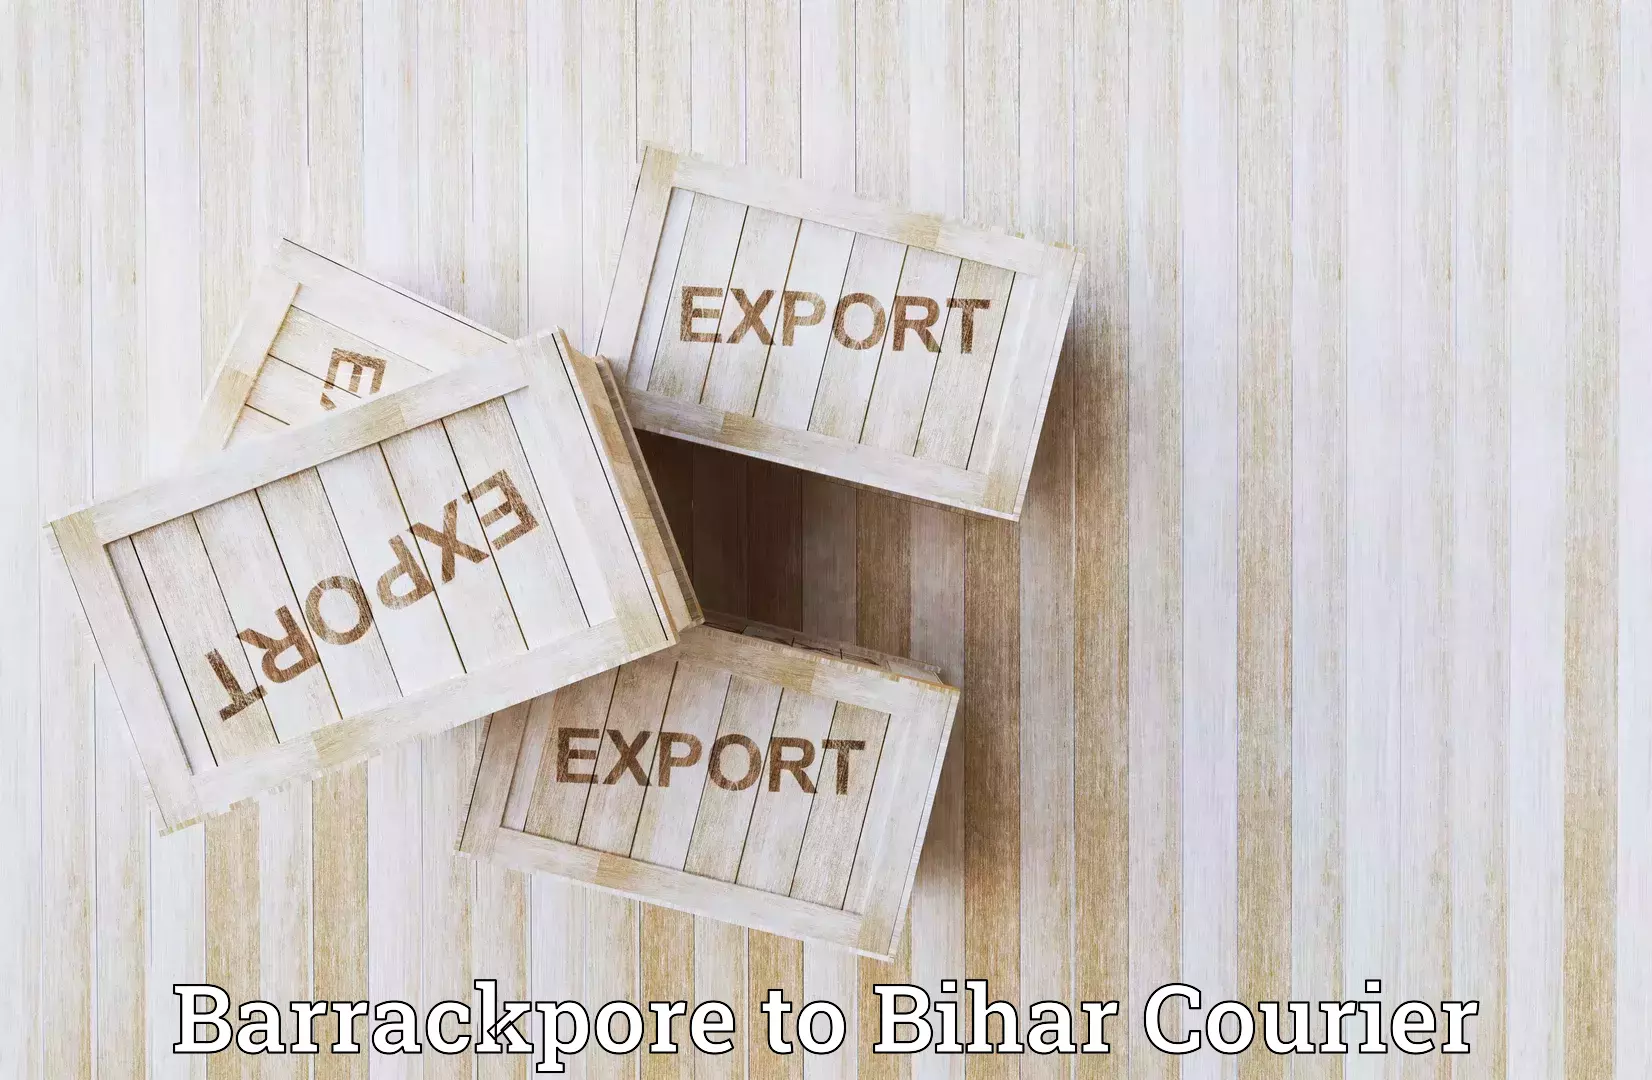 Efficient cargo services Barrackpore to Kamtaul